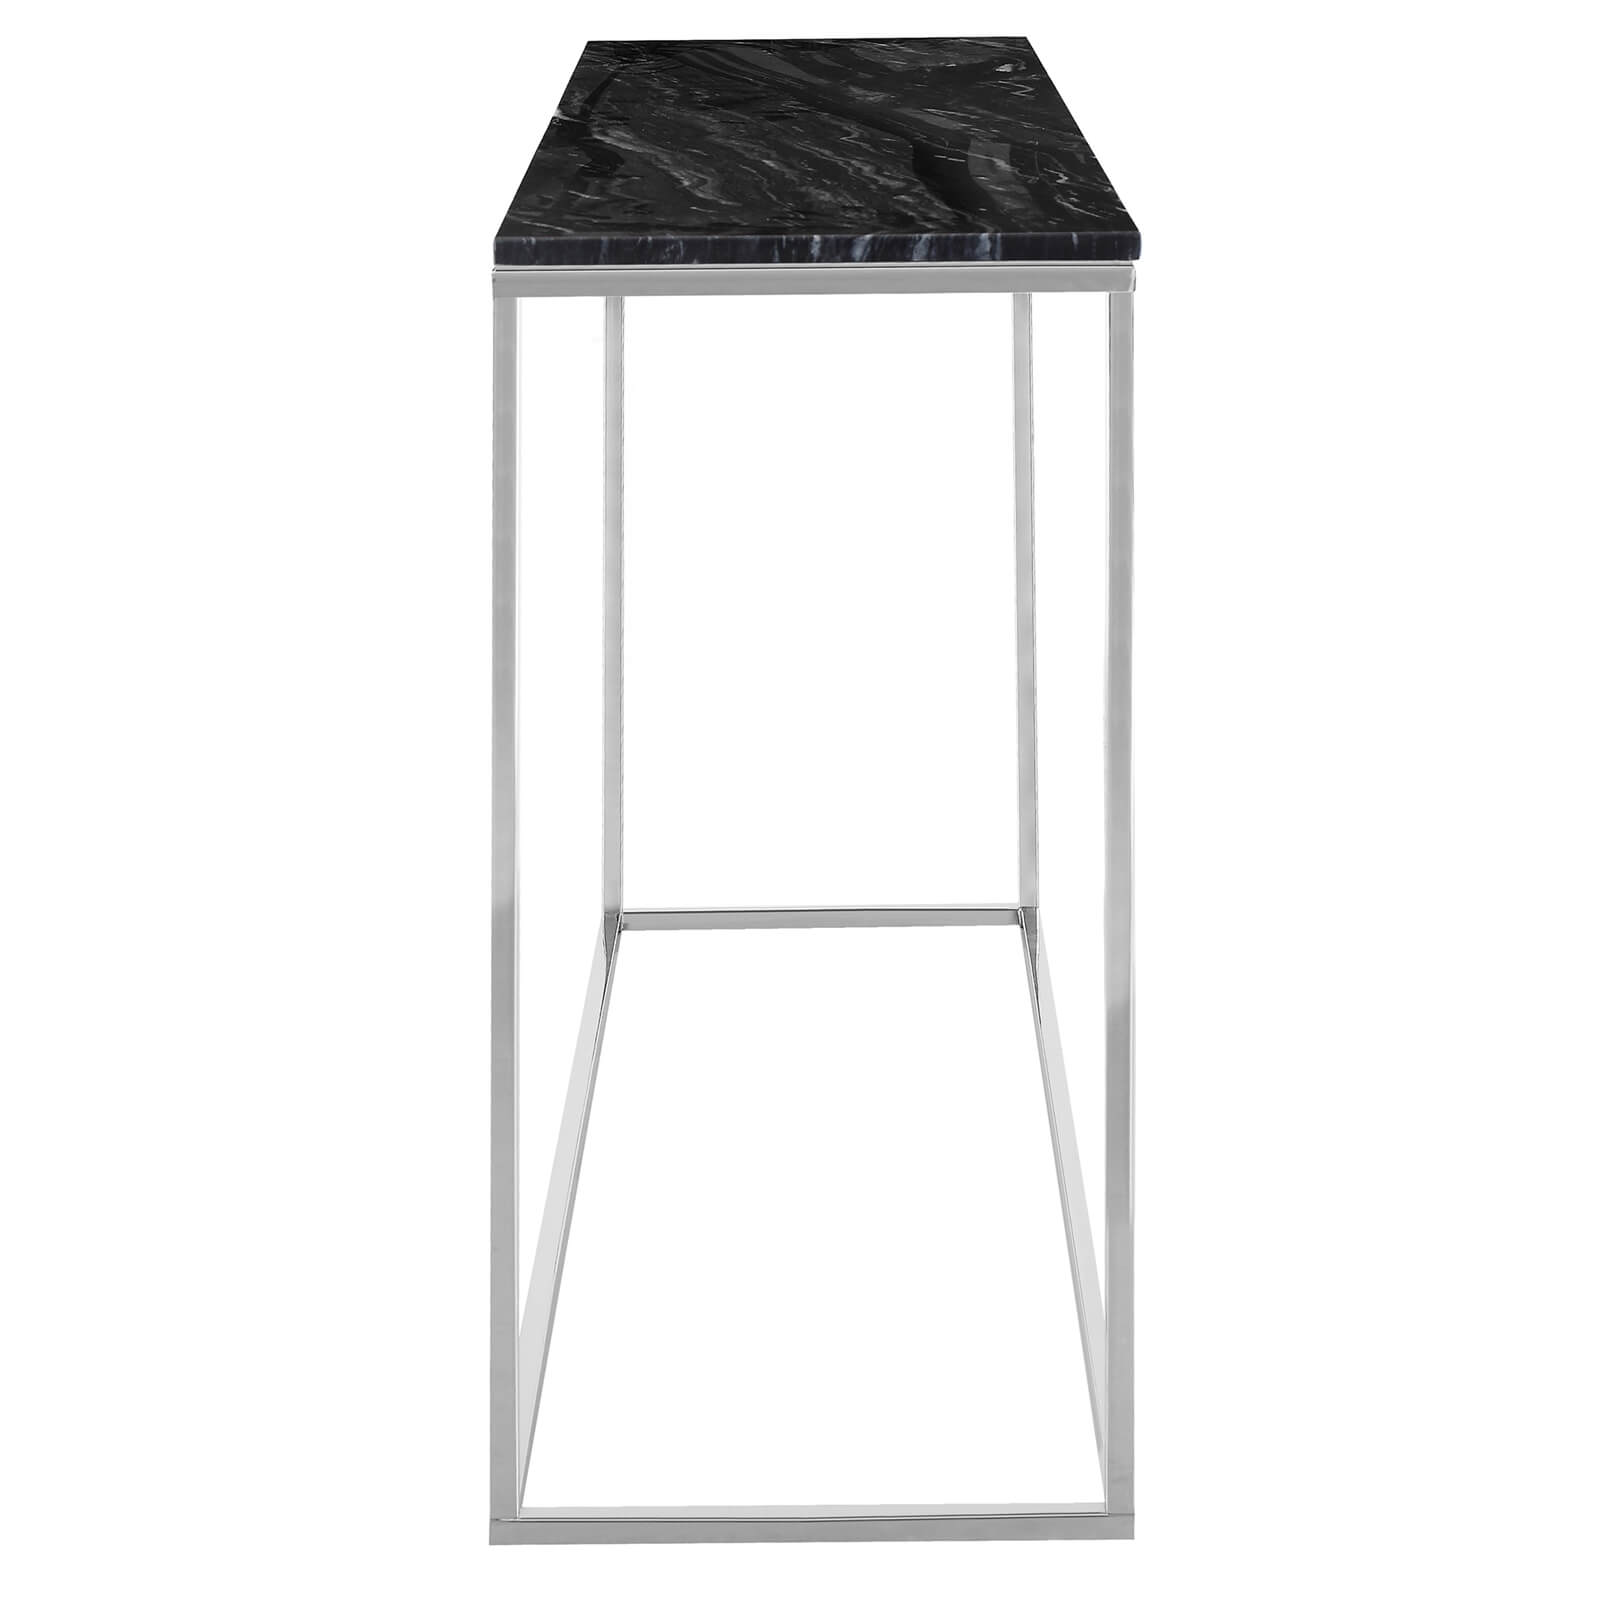 Signet Console Table - Black Marble & Chrome